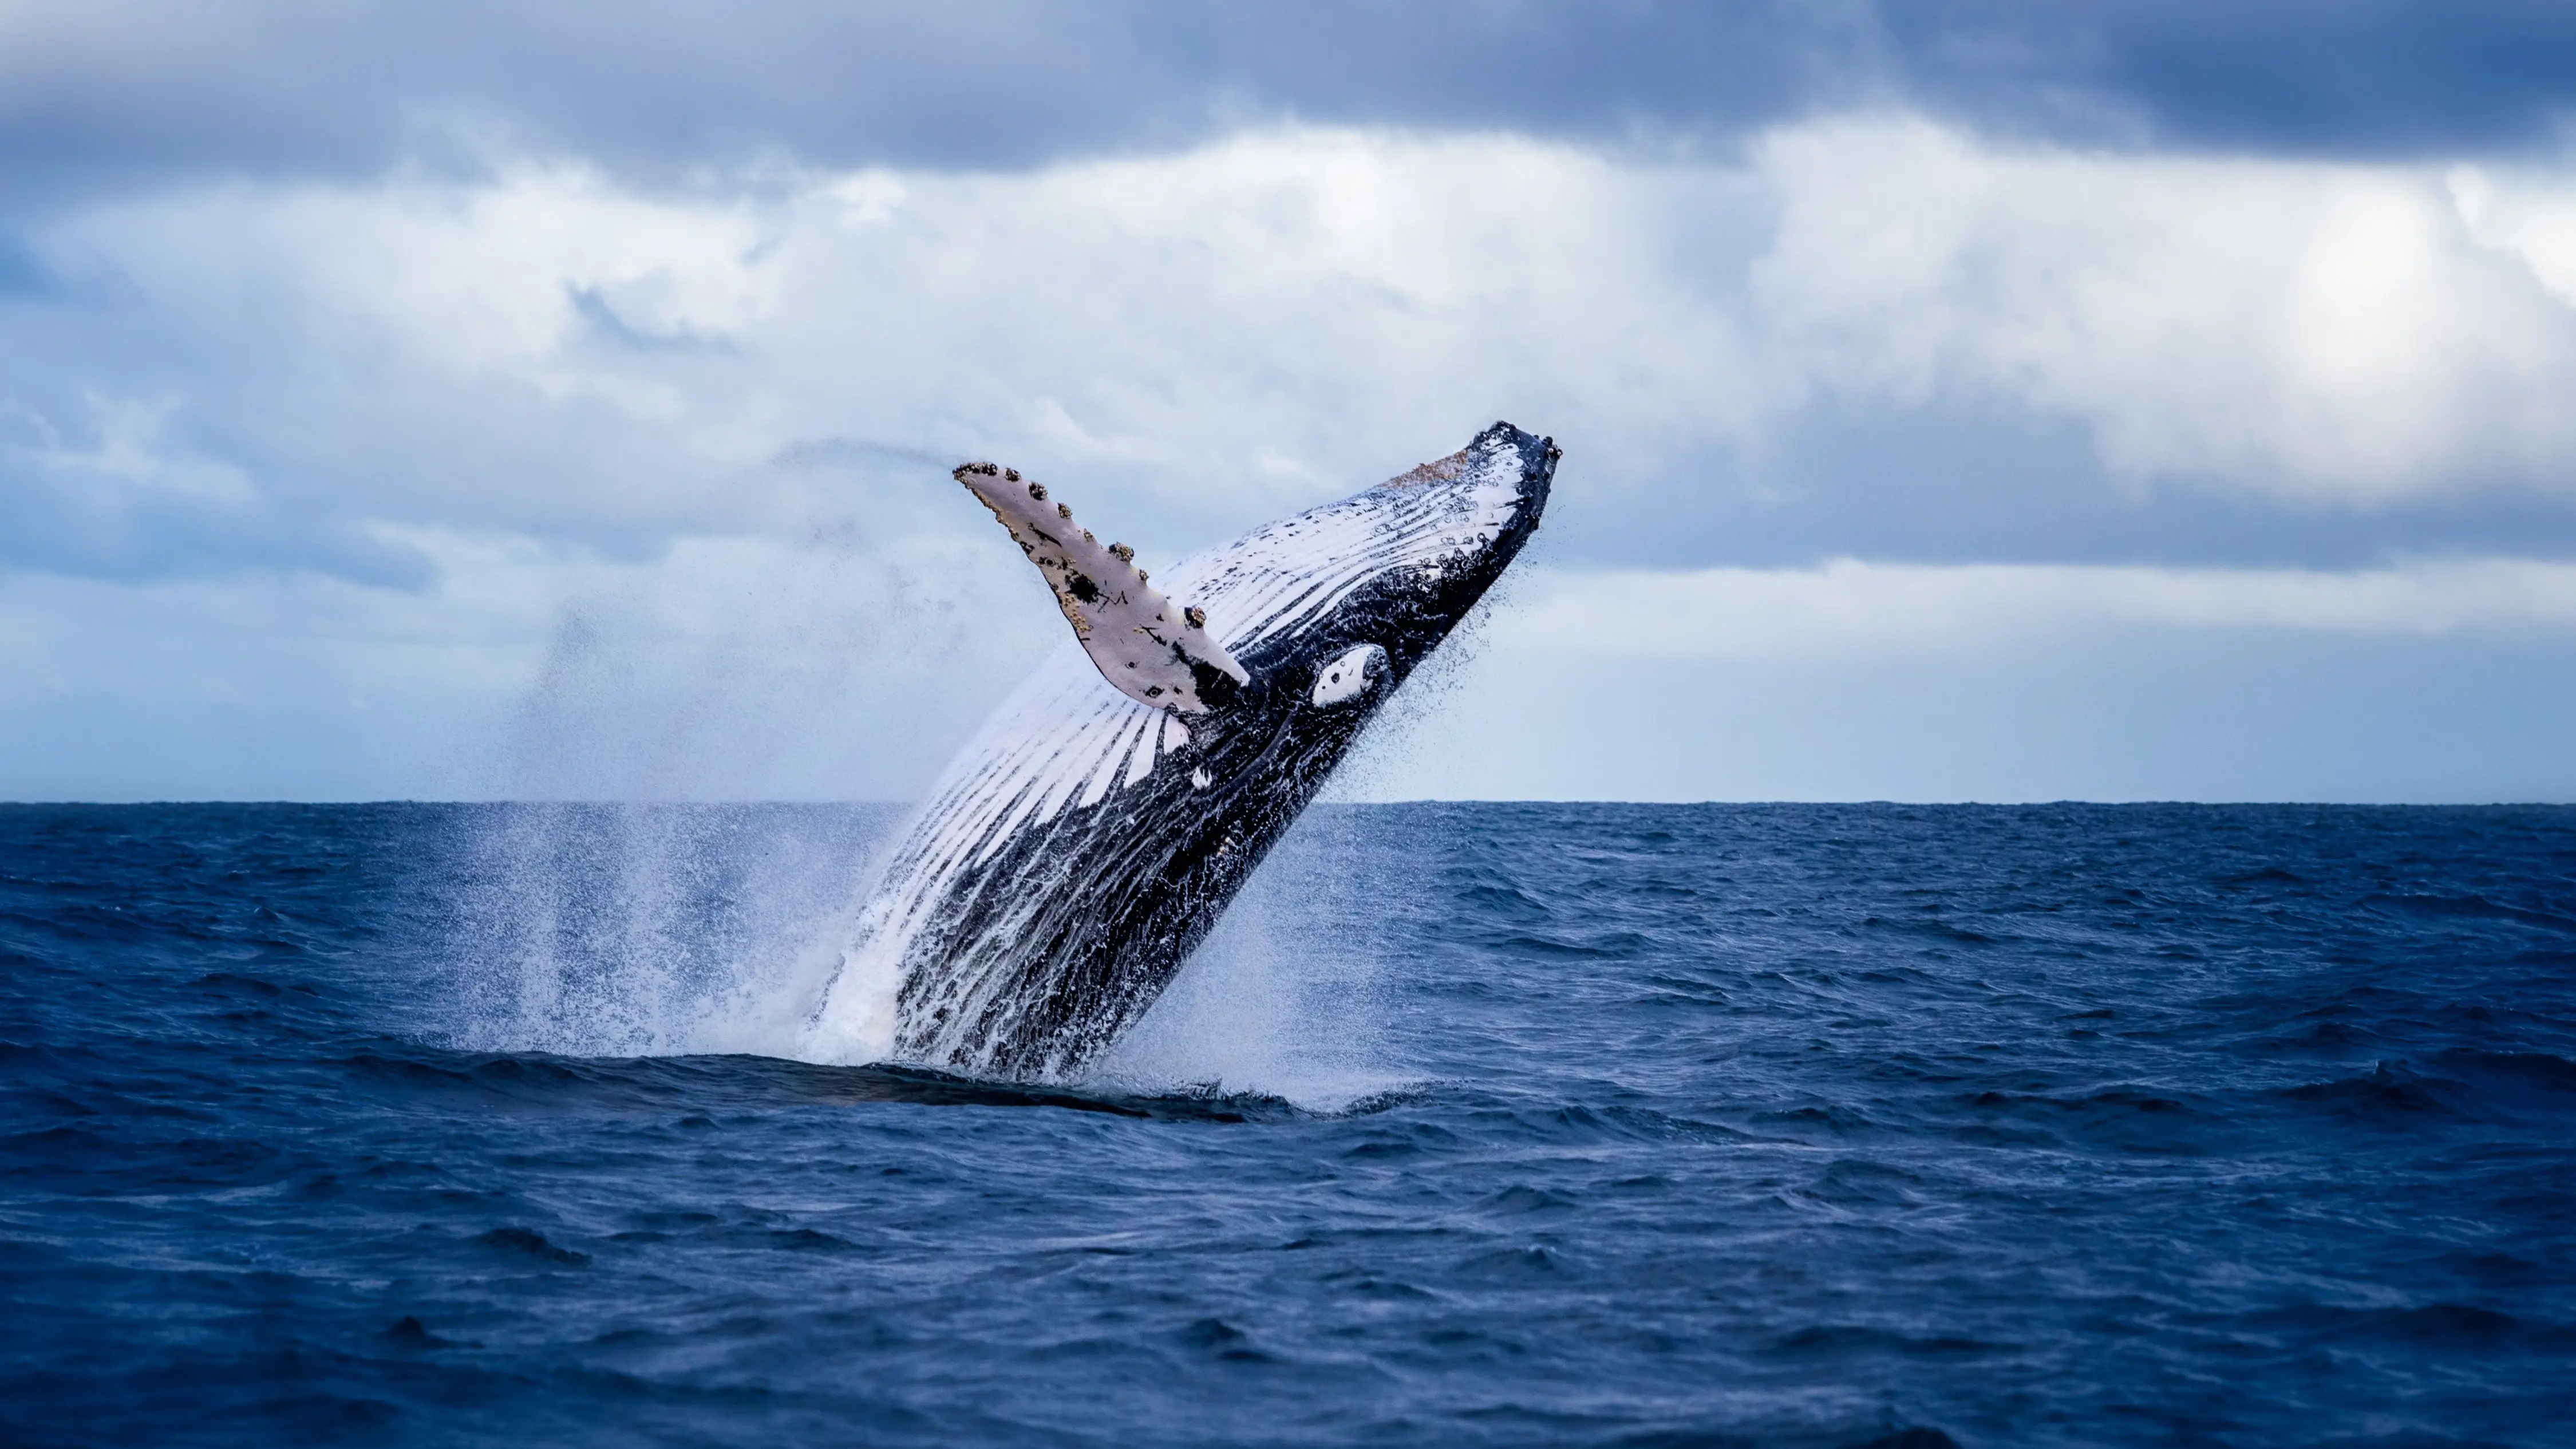 Humpback whale flipping backwards out of the ocean on a sunny day. Image credit: Shutterstock